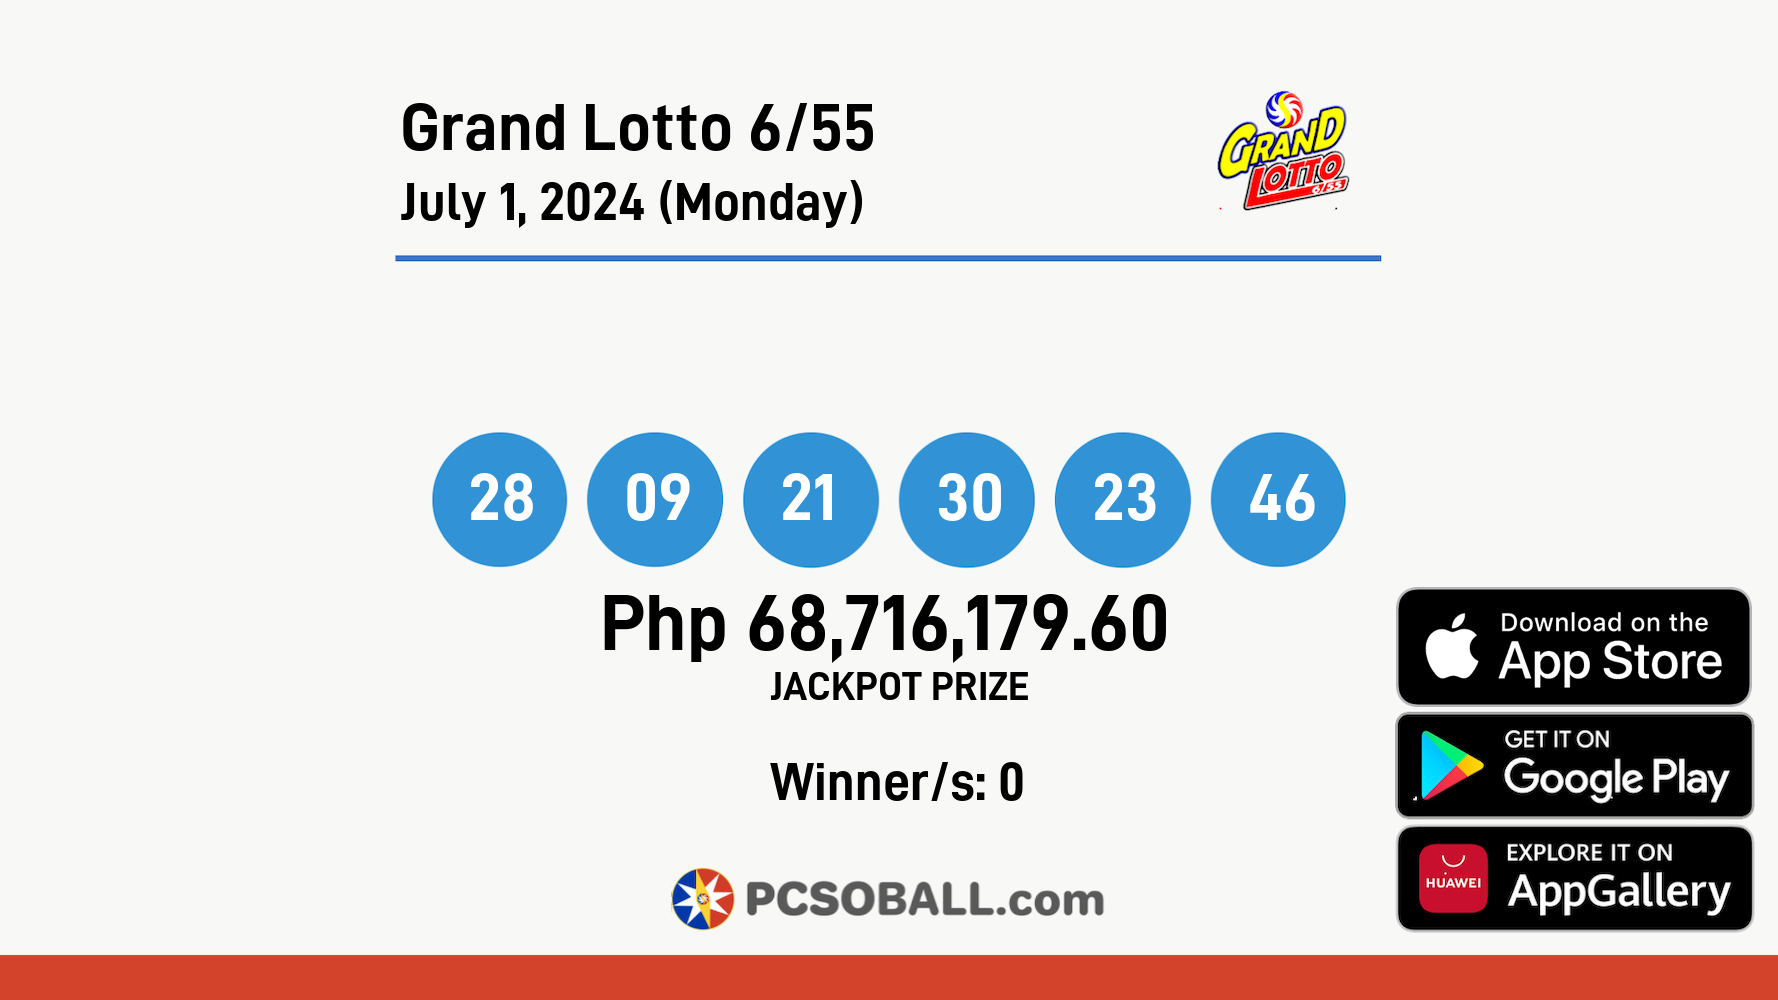 Grand Lotto 6/55 July 1, 2024 (Monday) Result